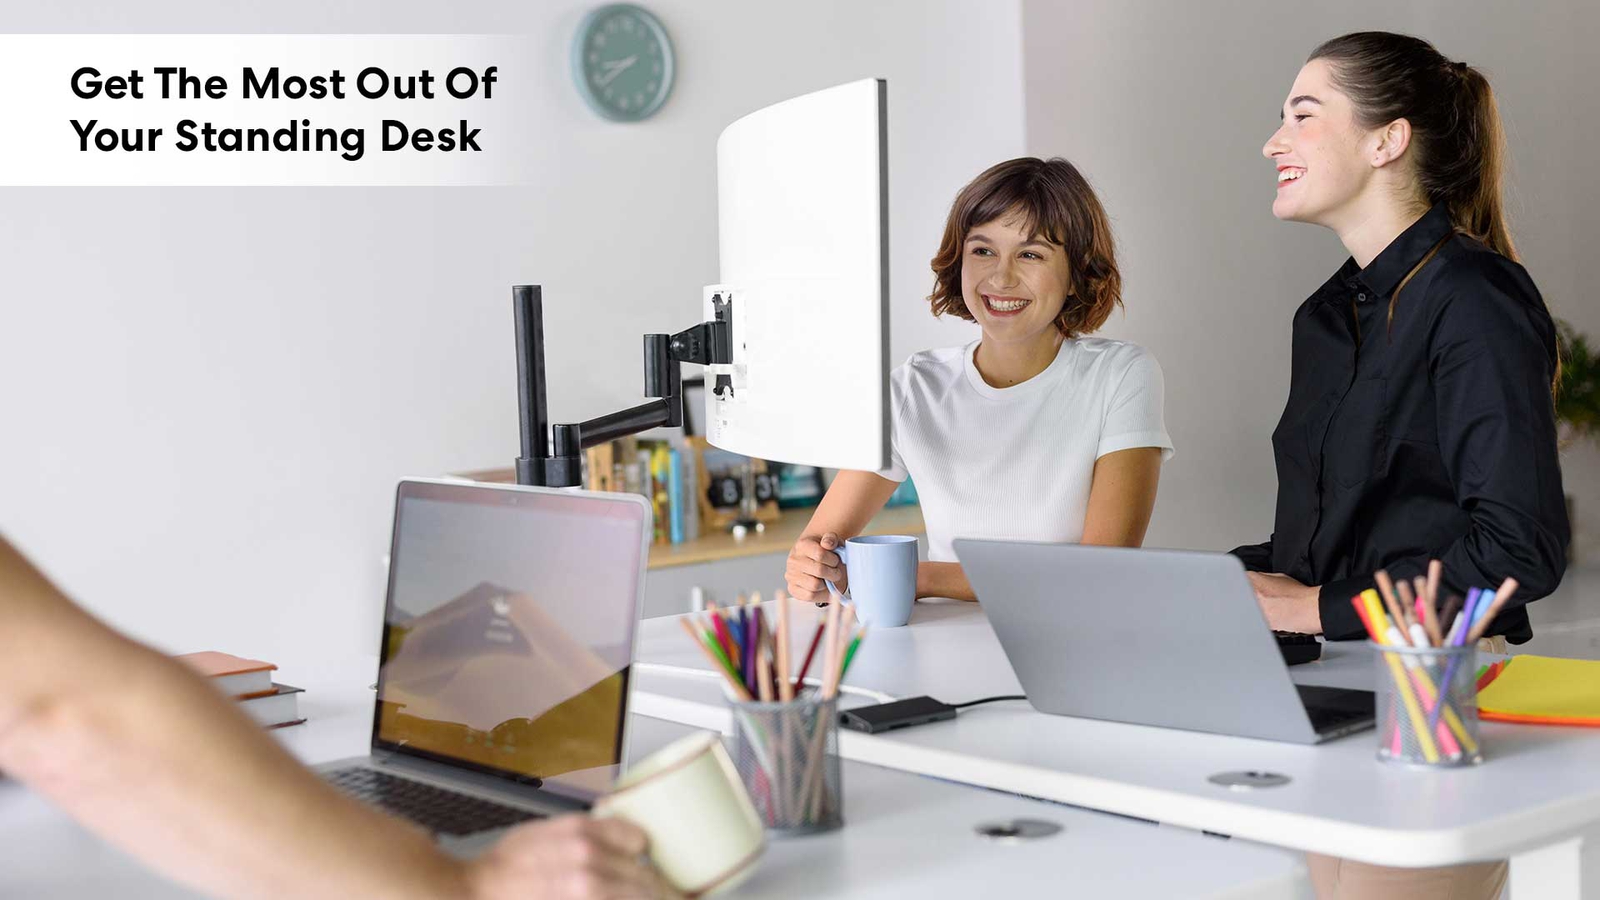 Ways To Get The Most Out Of Your Standing Desk